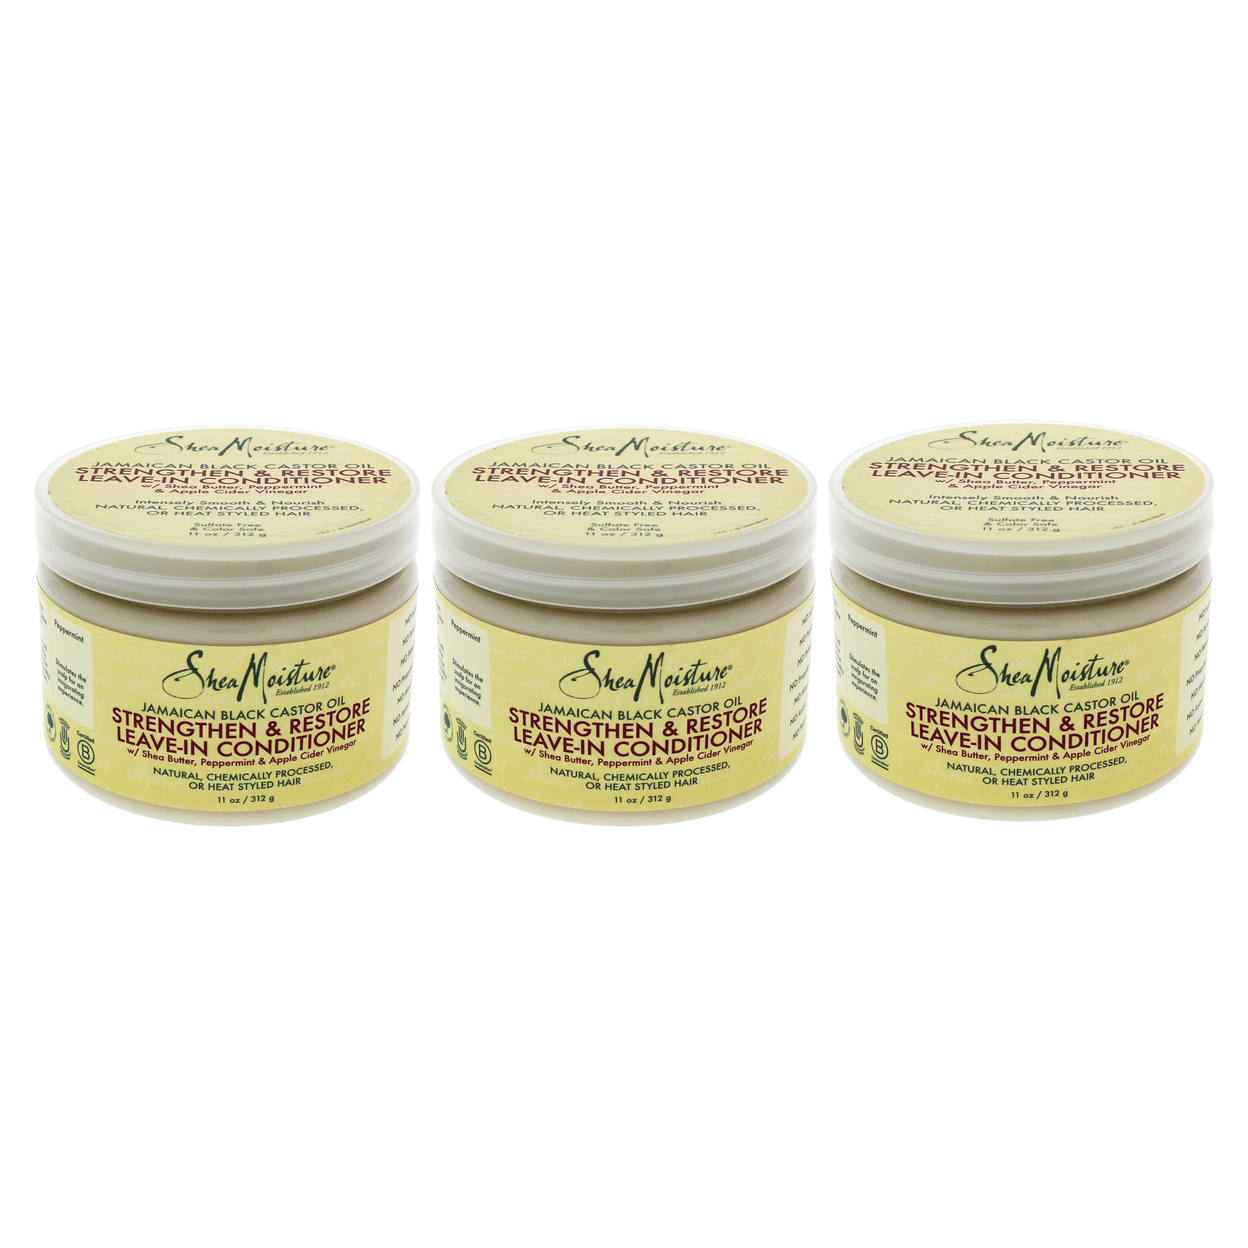 Shea Moisture Jamaican Black Castor Oil Strengthen And Restore Leave-In Conditioner - Pack Of 3 Conditioner 11 Oz